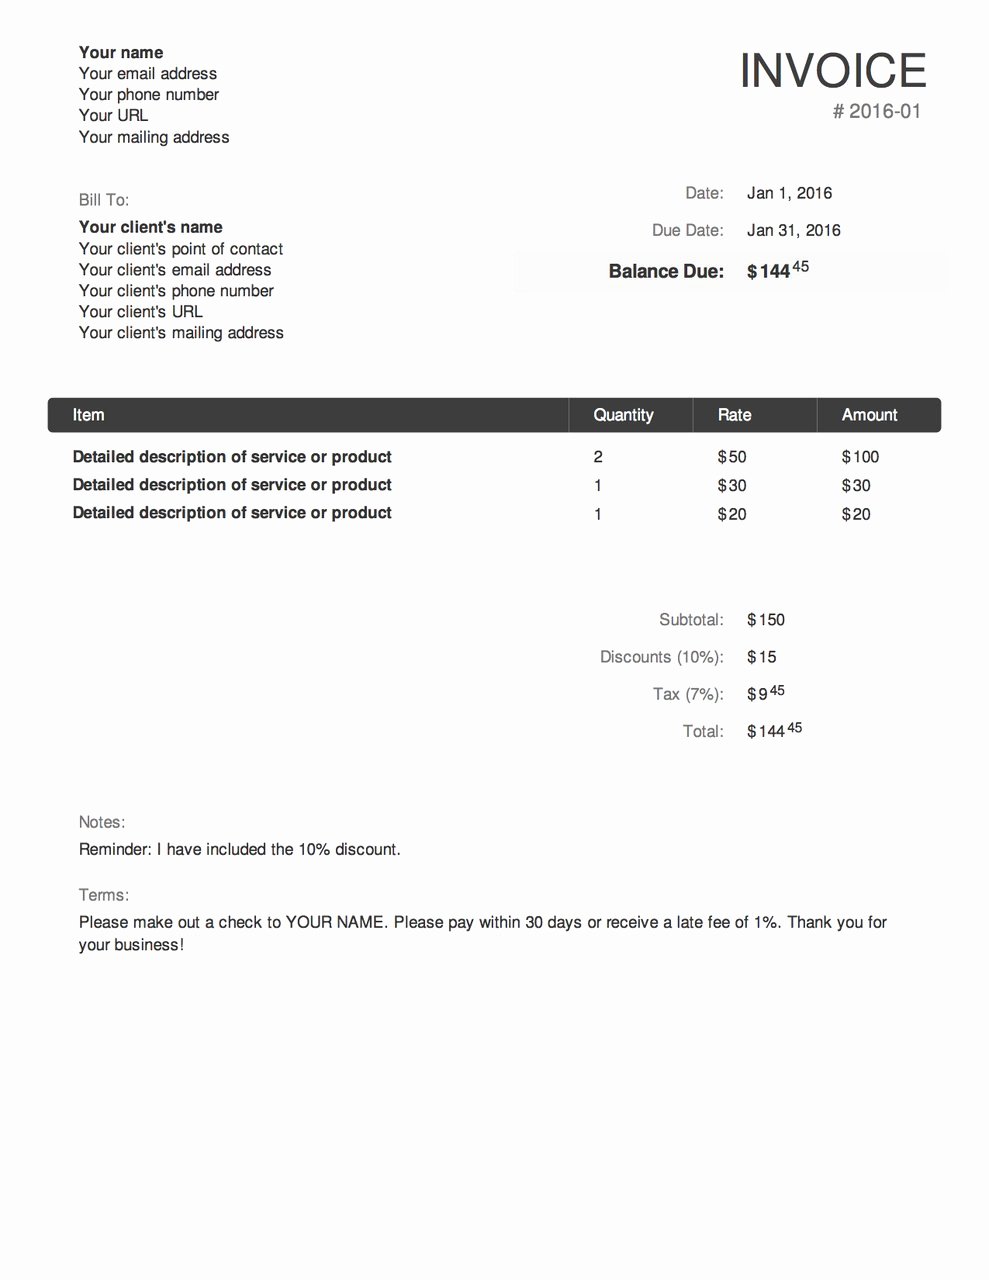 Invoice Template for Freelance Luxury Invoicing for Freelancers 6 Tips to Invoice Like A Pro